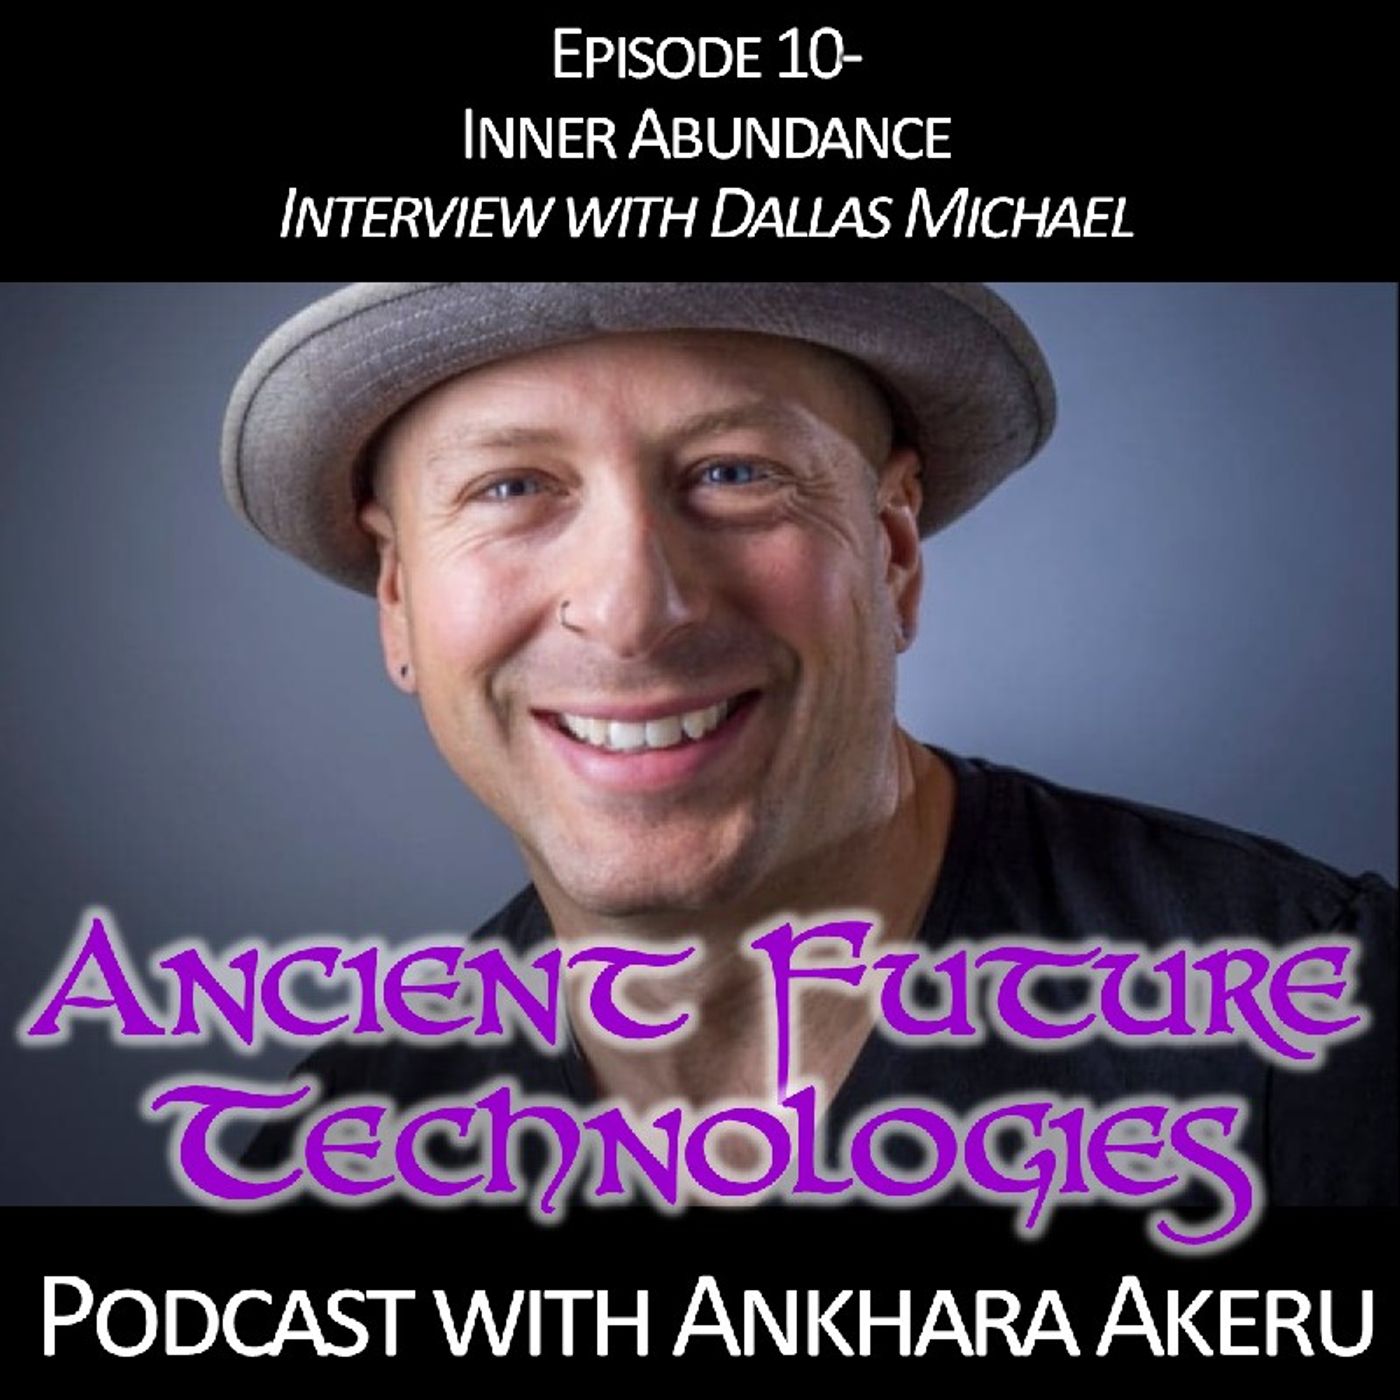 Episode 010 Inner Aundance~ Interview with Dallas Michael